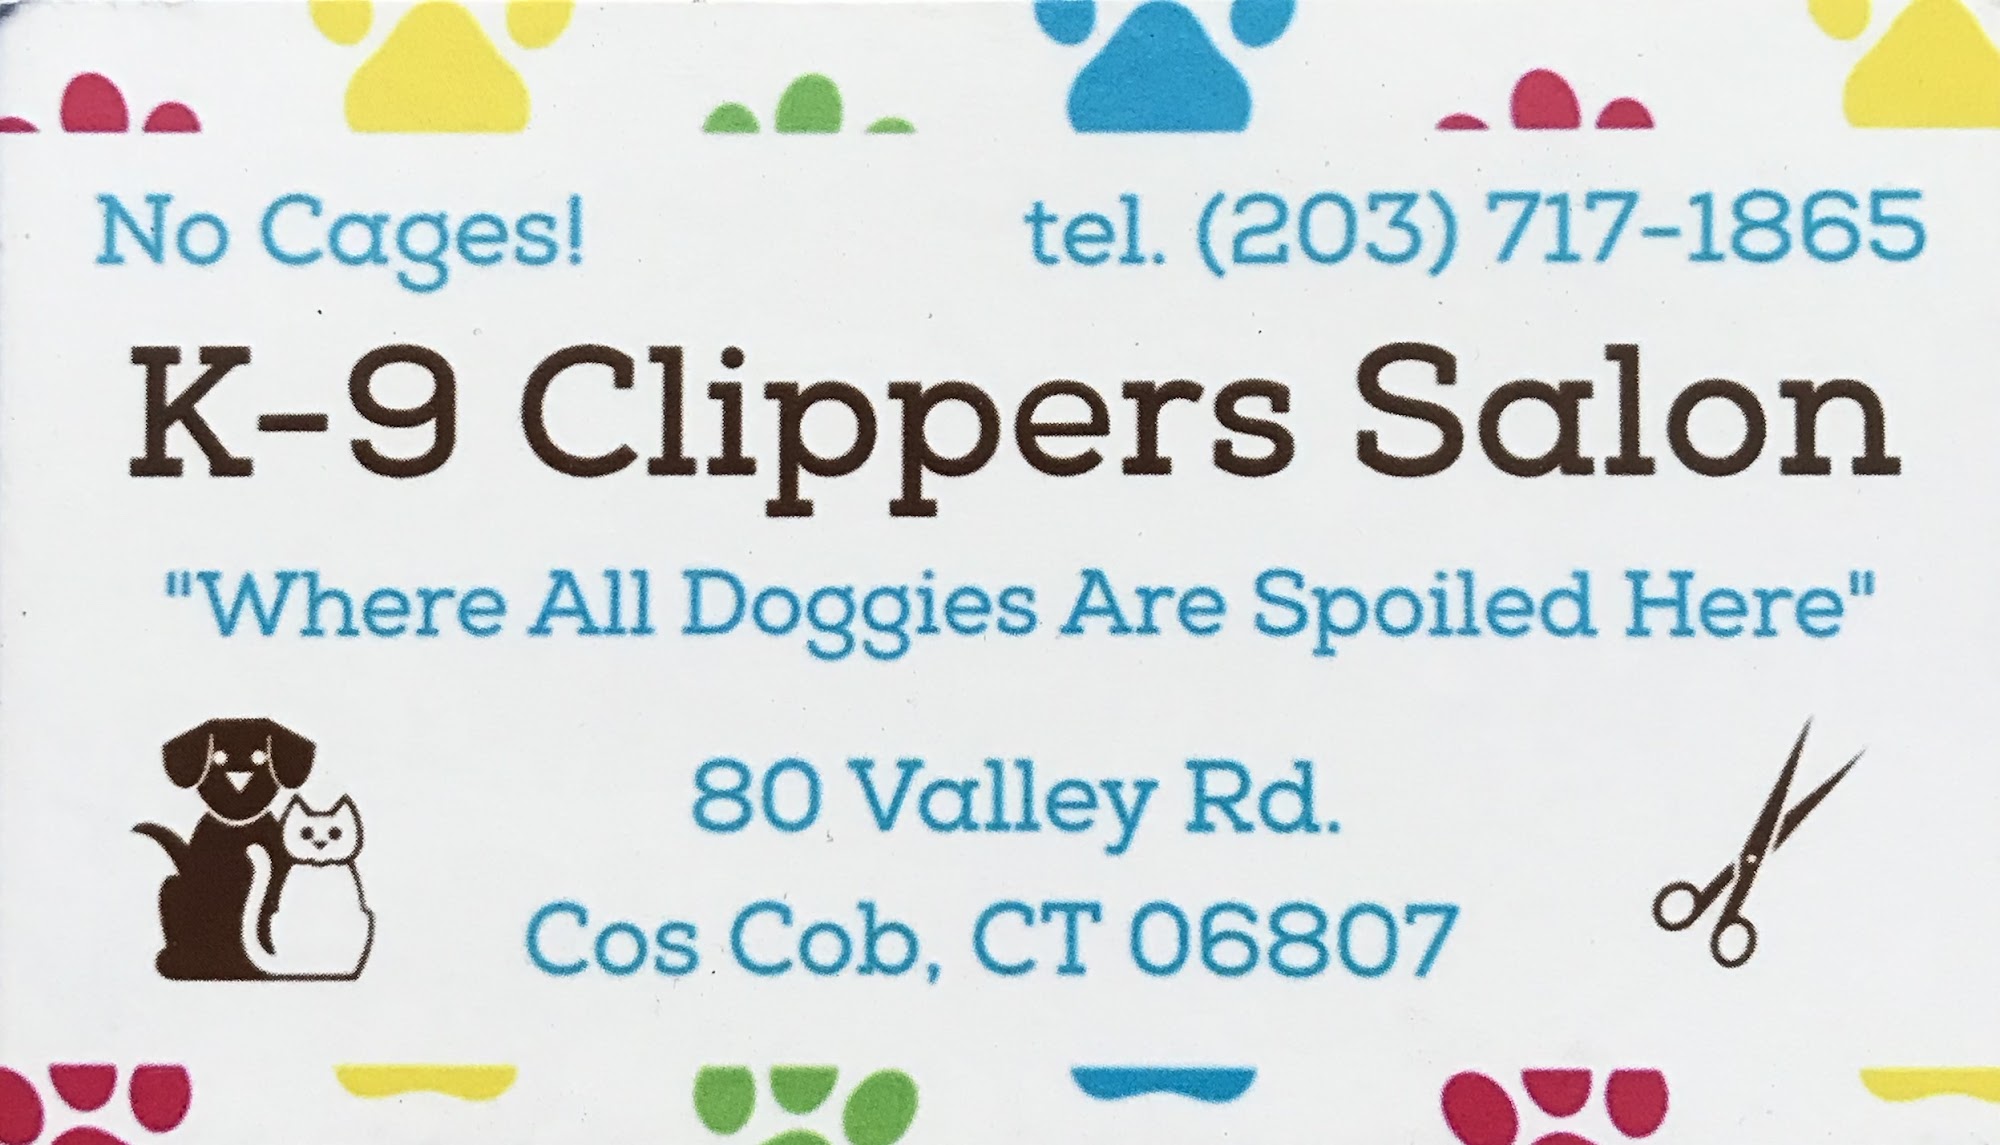 K9 Clippers Salon 80 Valley Rd, Cos Cob Connecticut 06807